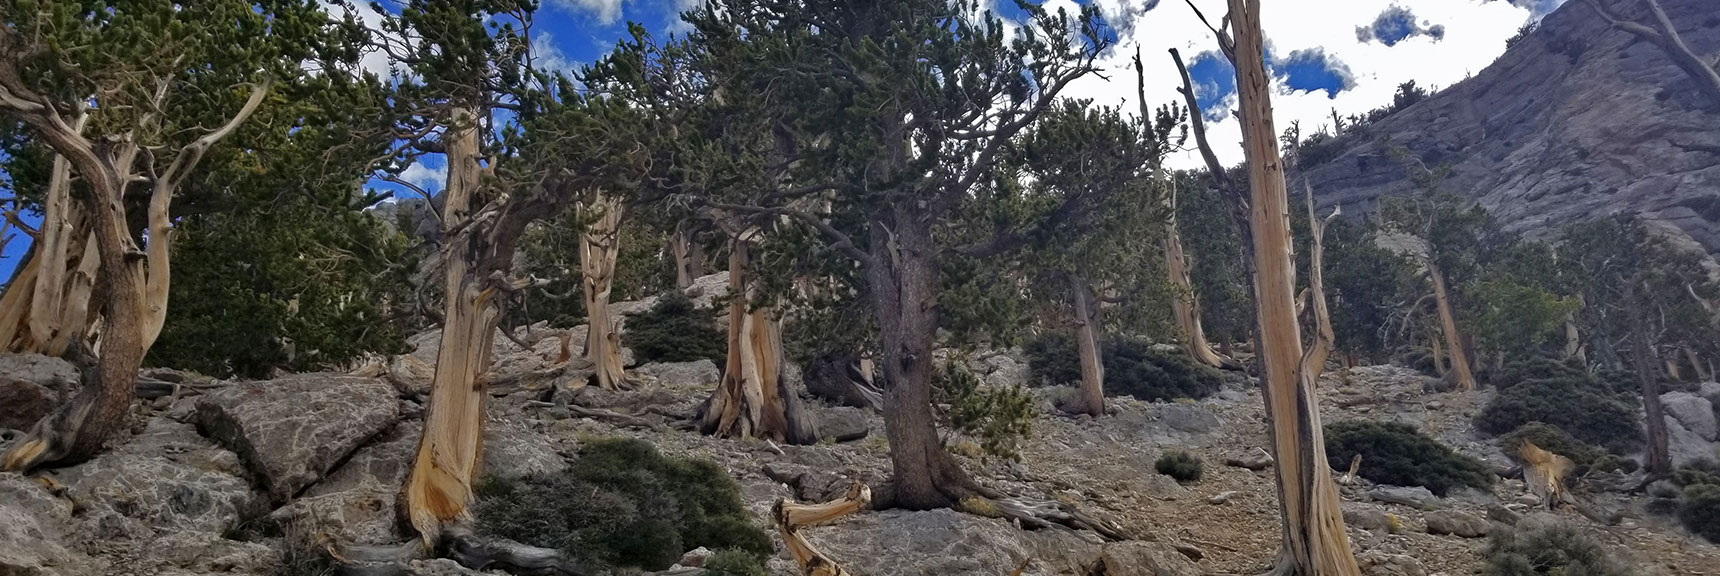 Bristlecone Pines Take Over on the Mid South Summit Approach. | The Sisters South | Lee Canyon | Mt Charleston Wilderness | Spring Mountains, Nevada